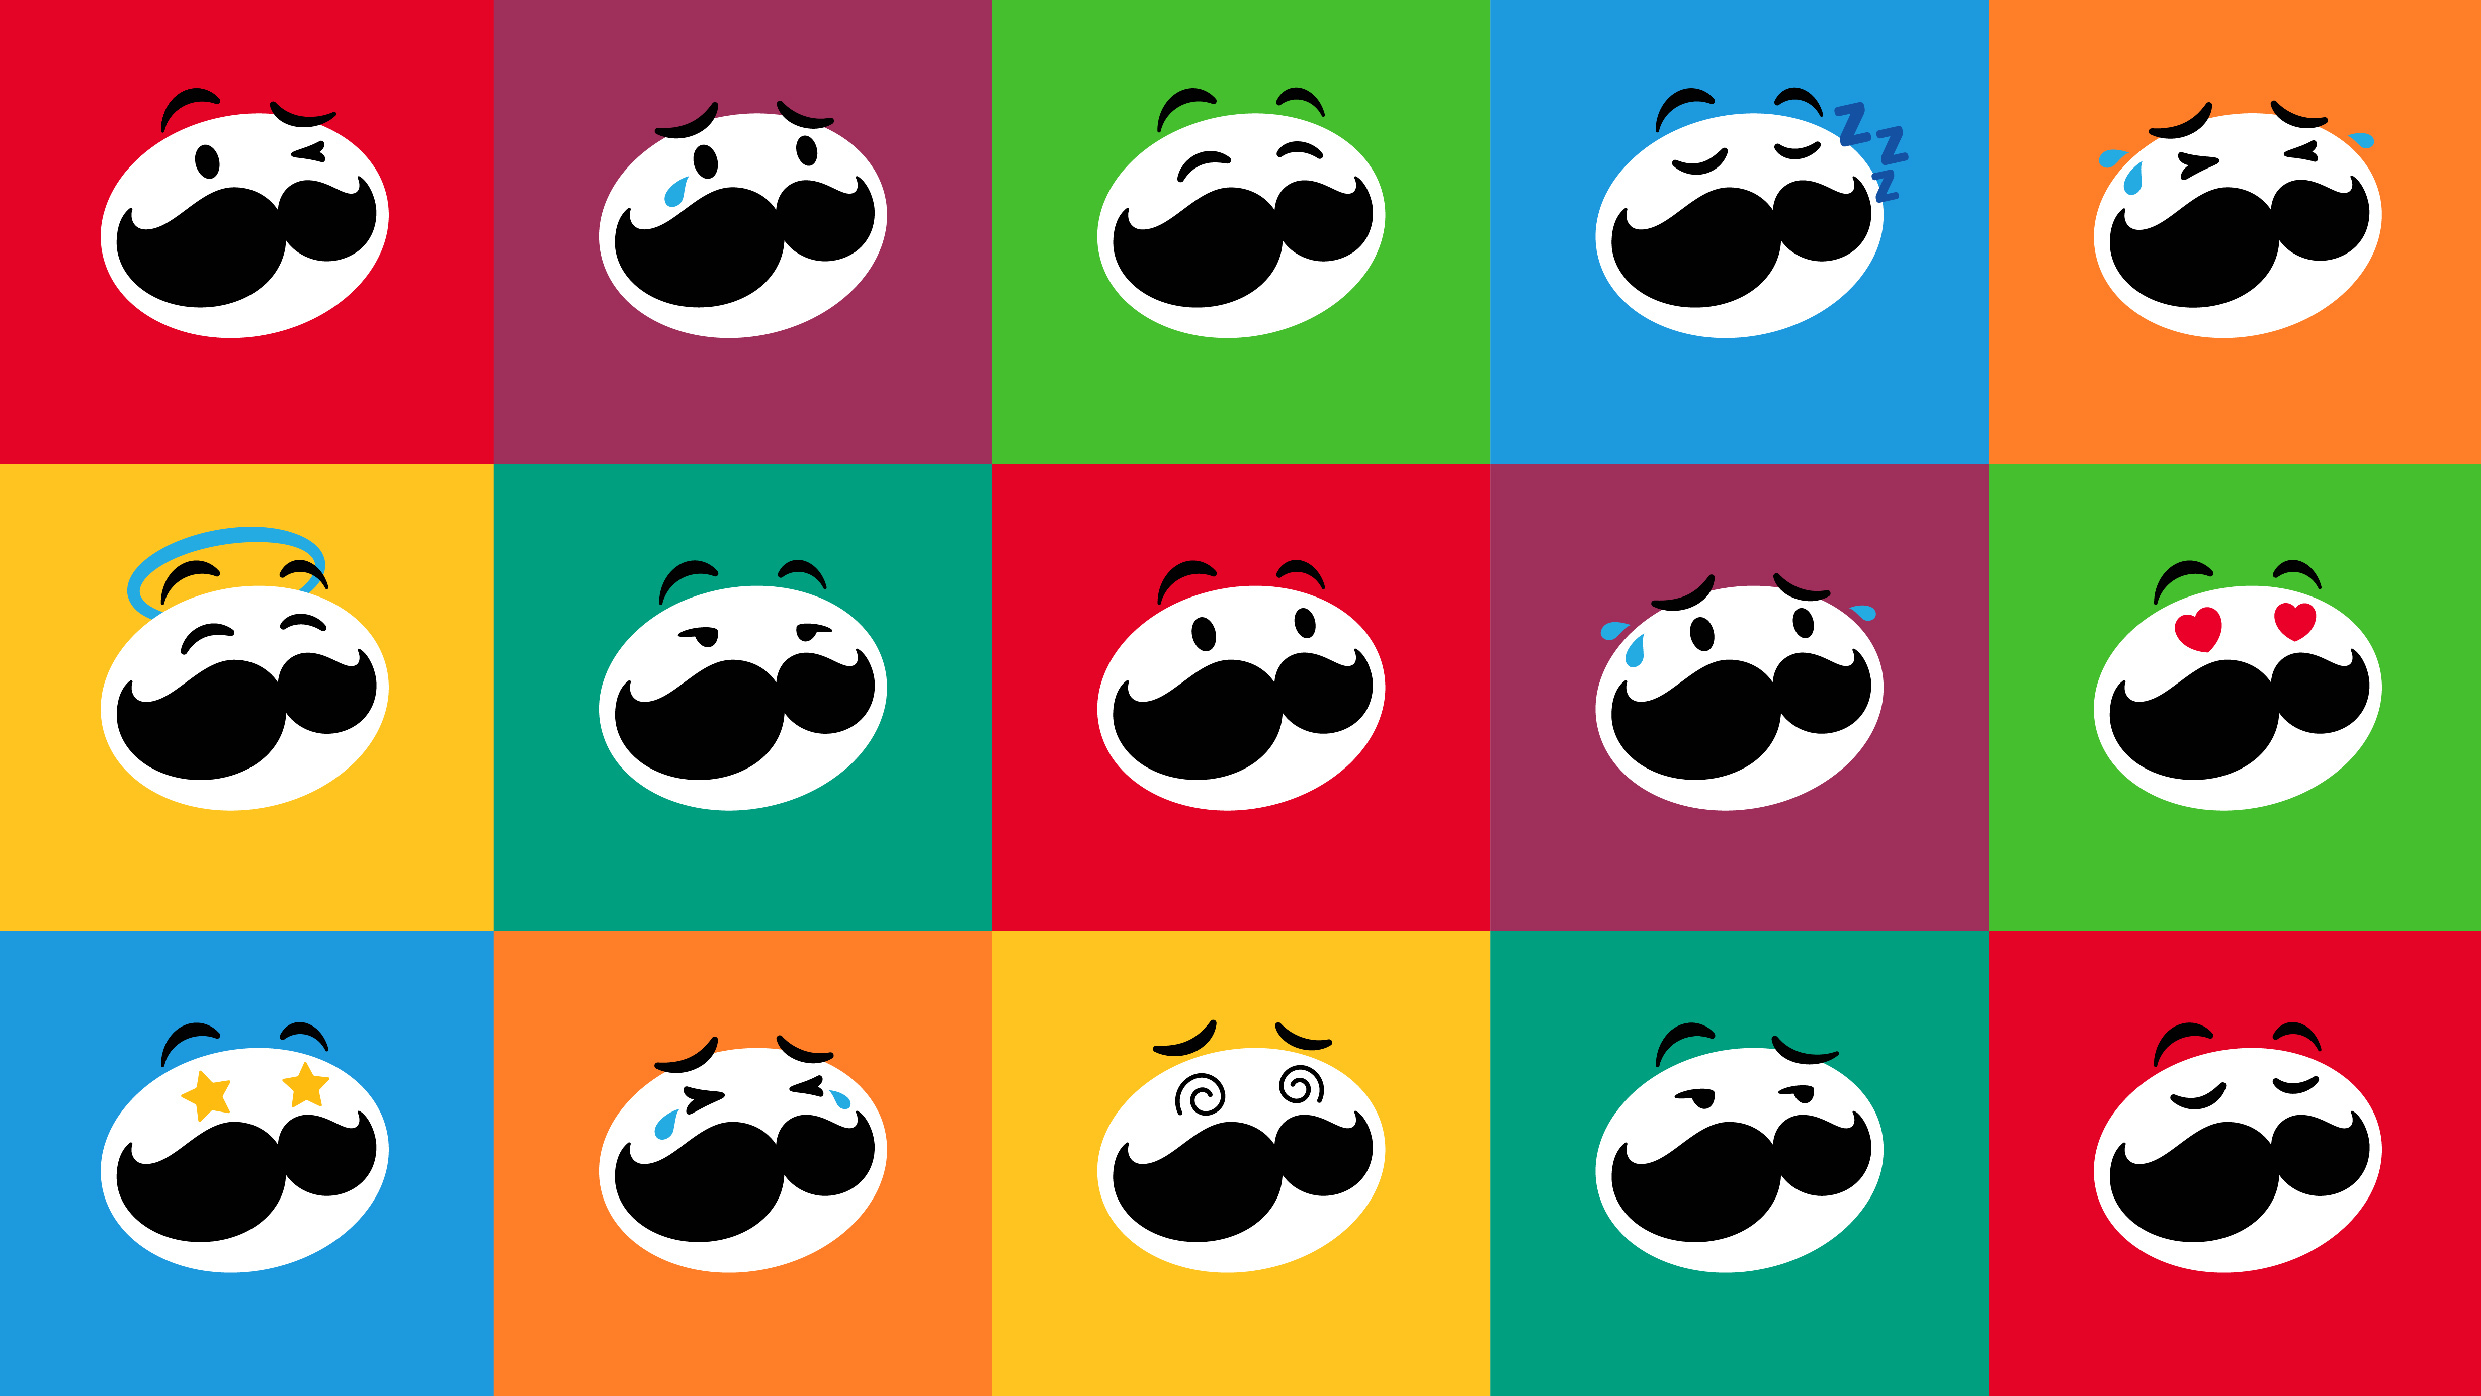 Pringles brand character expressions